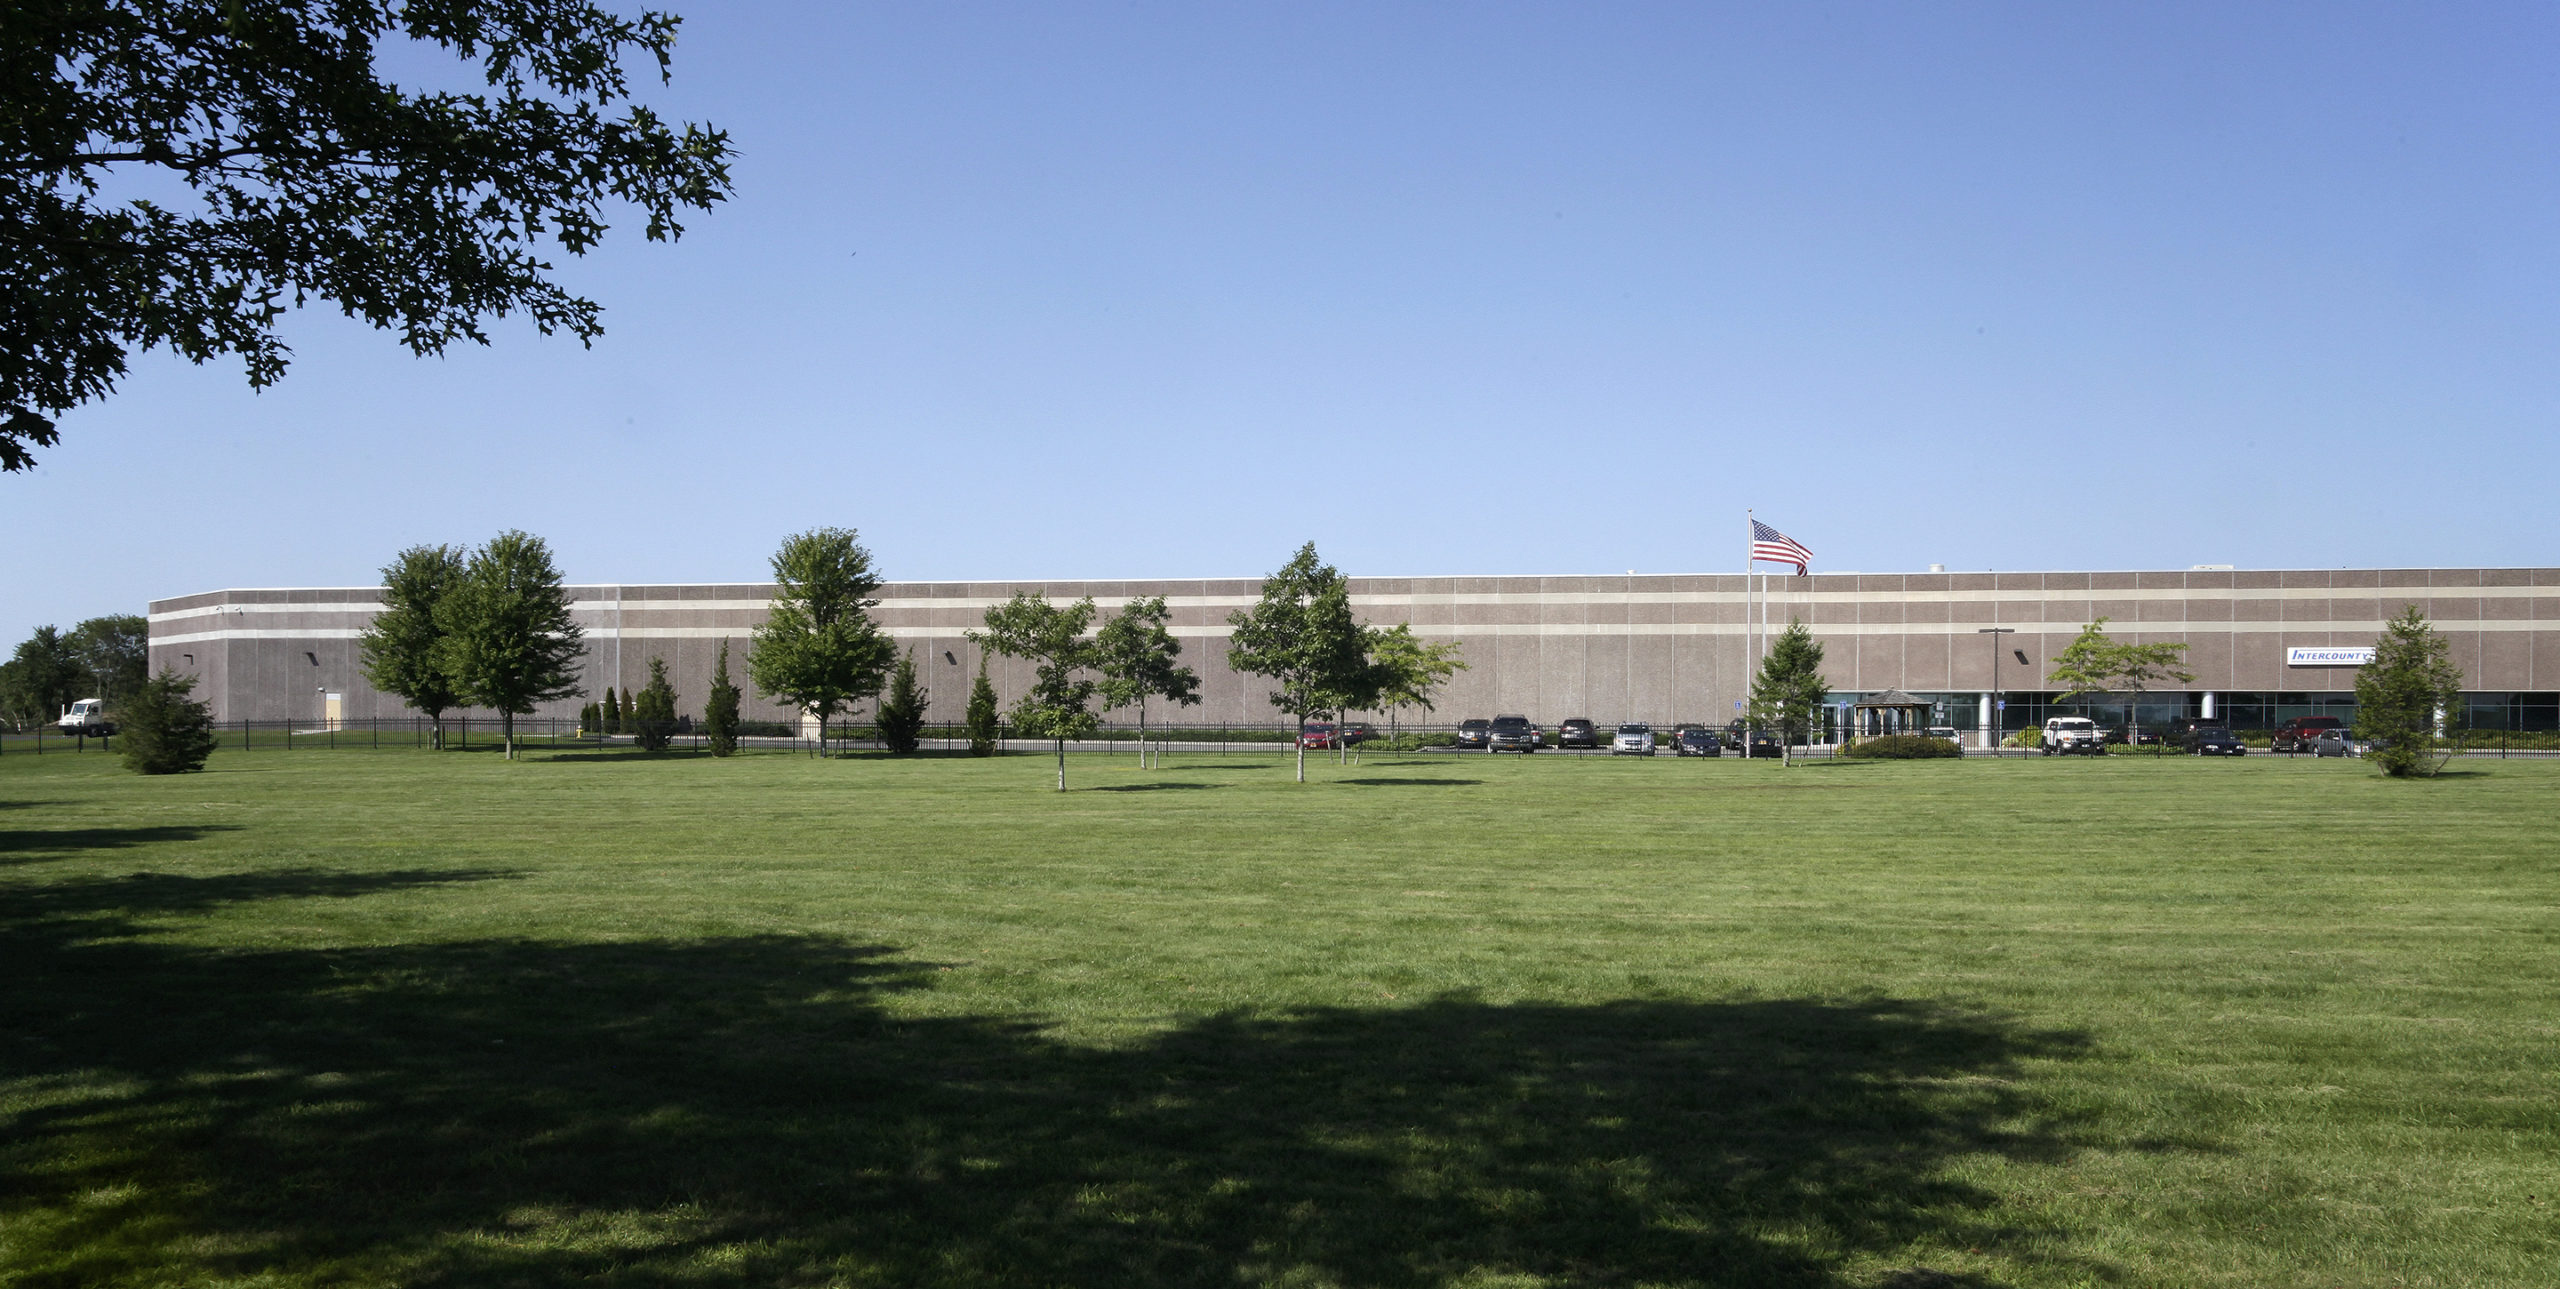 Exterior of Intercounty Appliance Corporation Warehouse in Medford